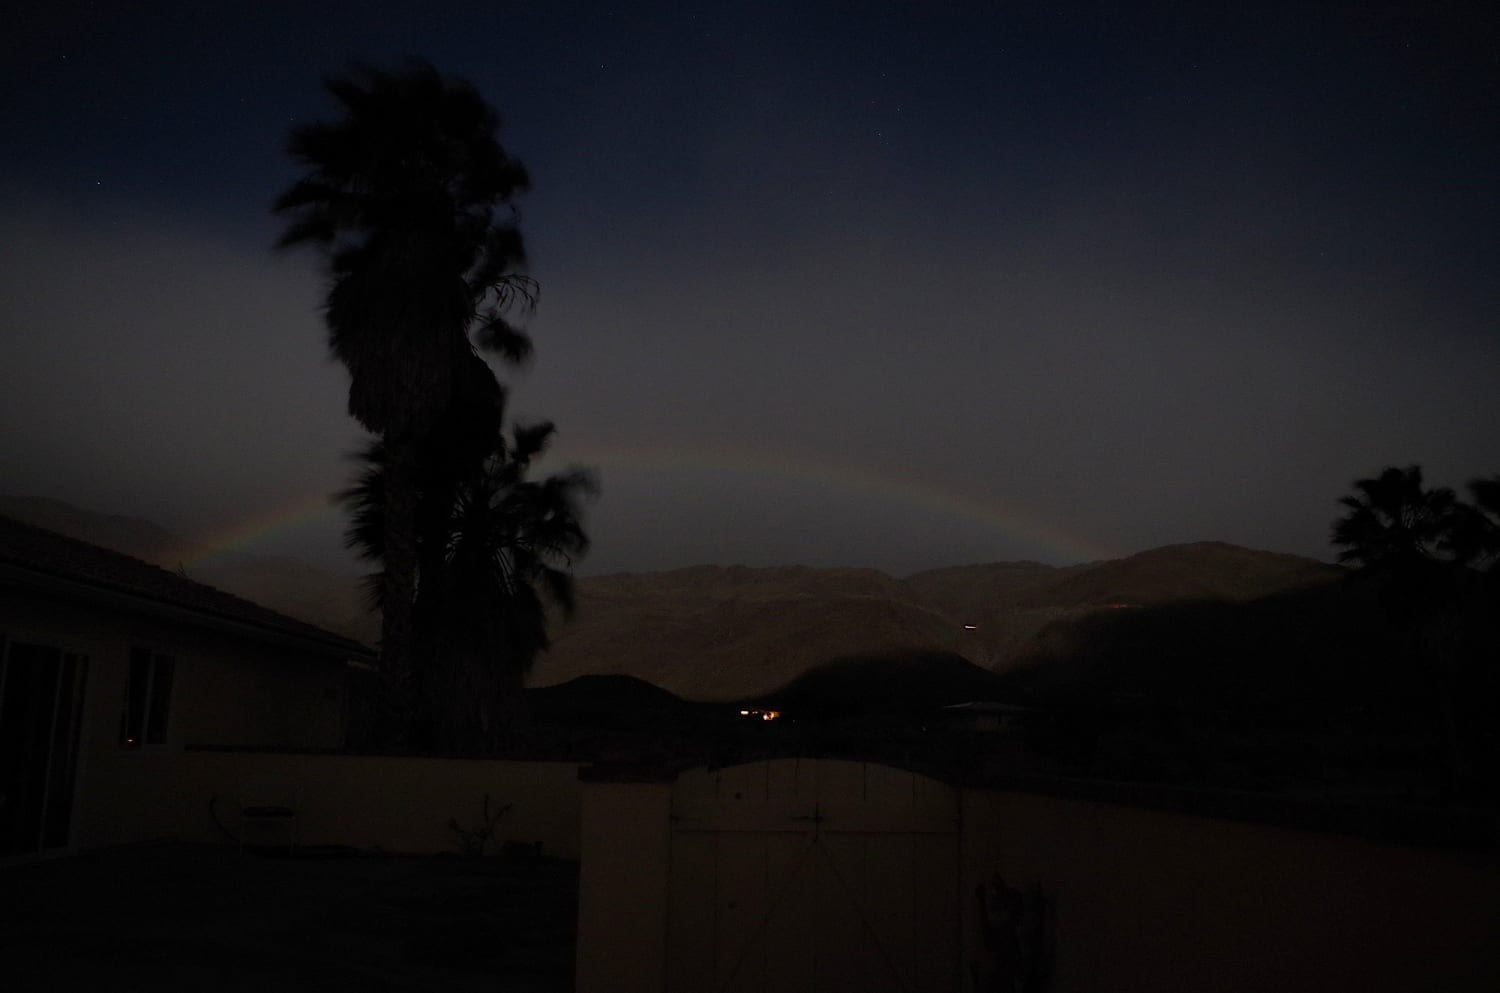 In perfect conditions, rainbows can come alive at night